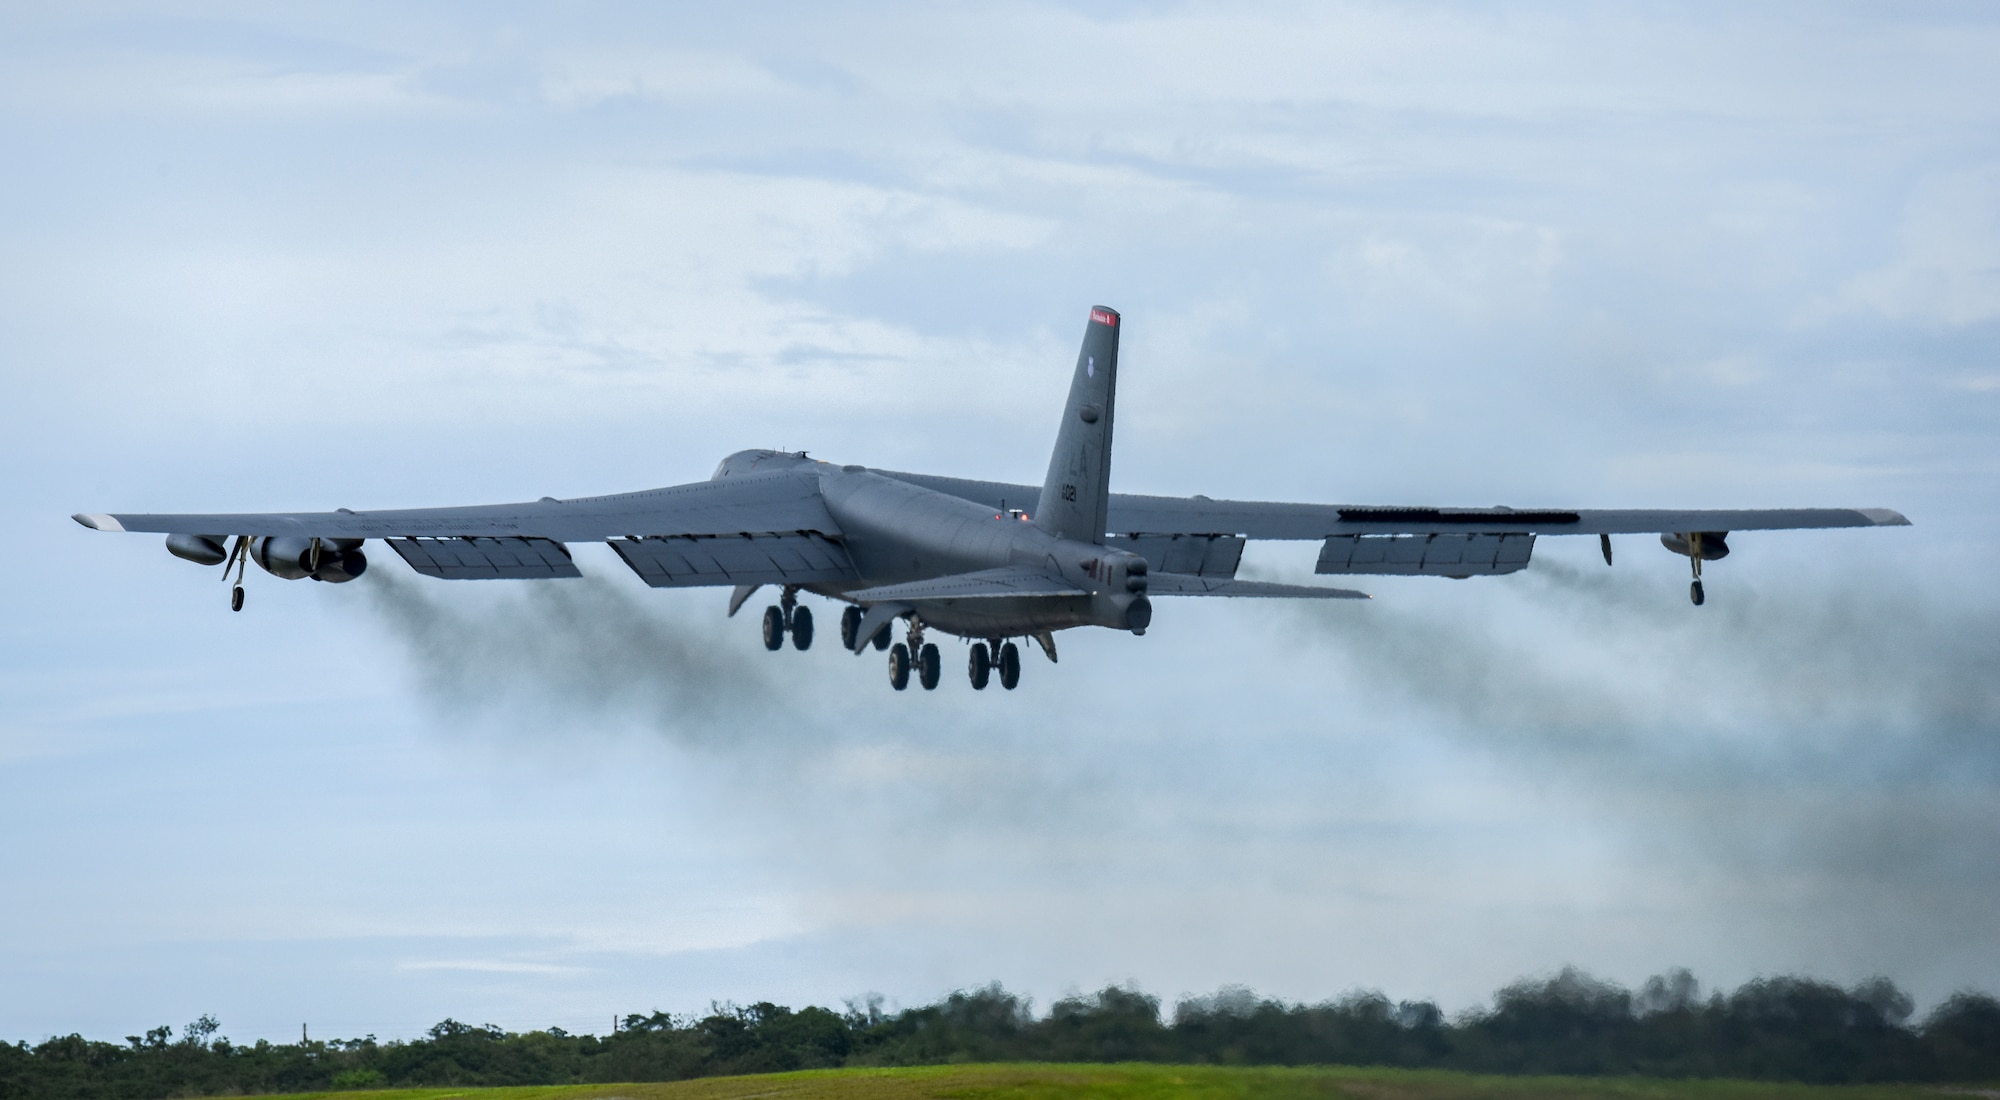 A U.S. Air Force B-52H Stratofortress bomber takes off from Andersen Air Force Base, Guam, for a routine training mission in the vicinity of the South China Sea and Indian Ocean, Sept 23, 2018 (HST).